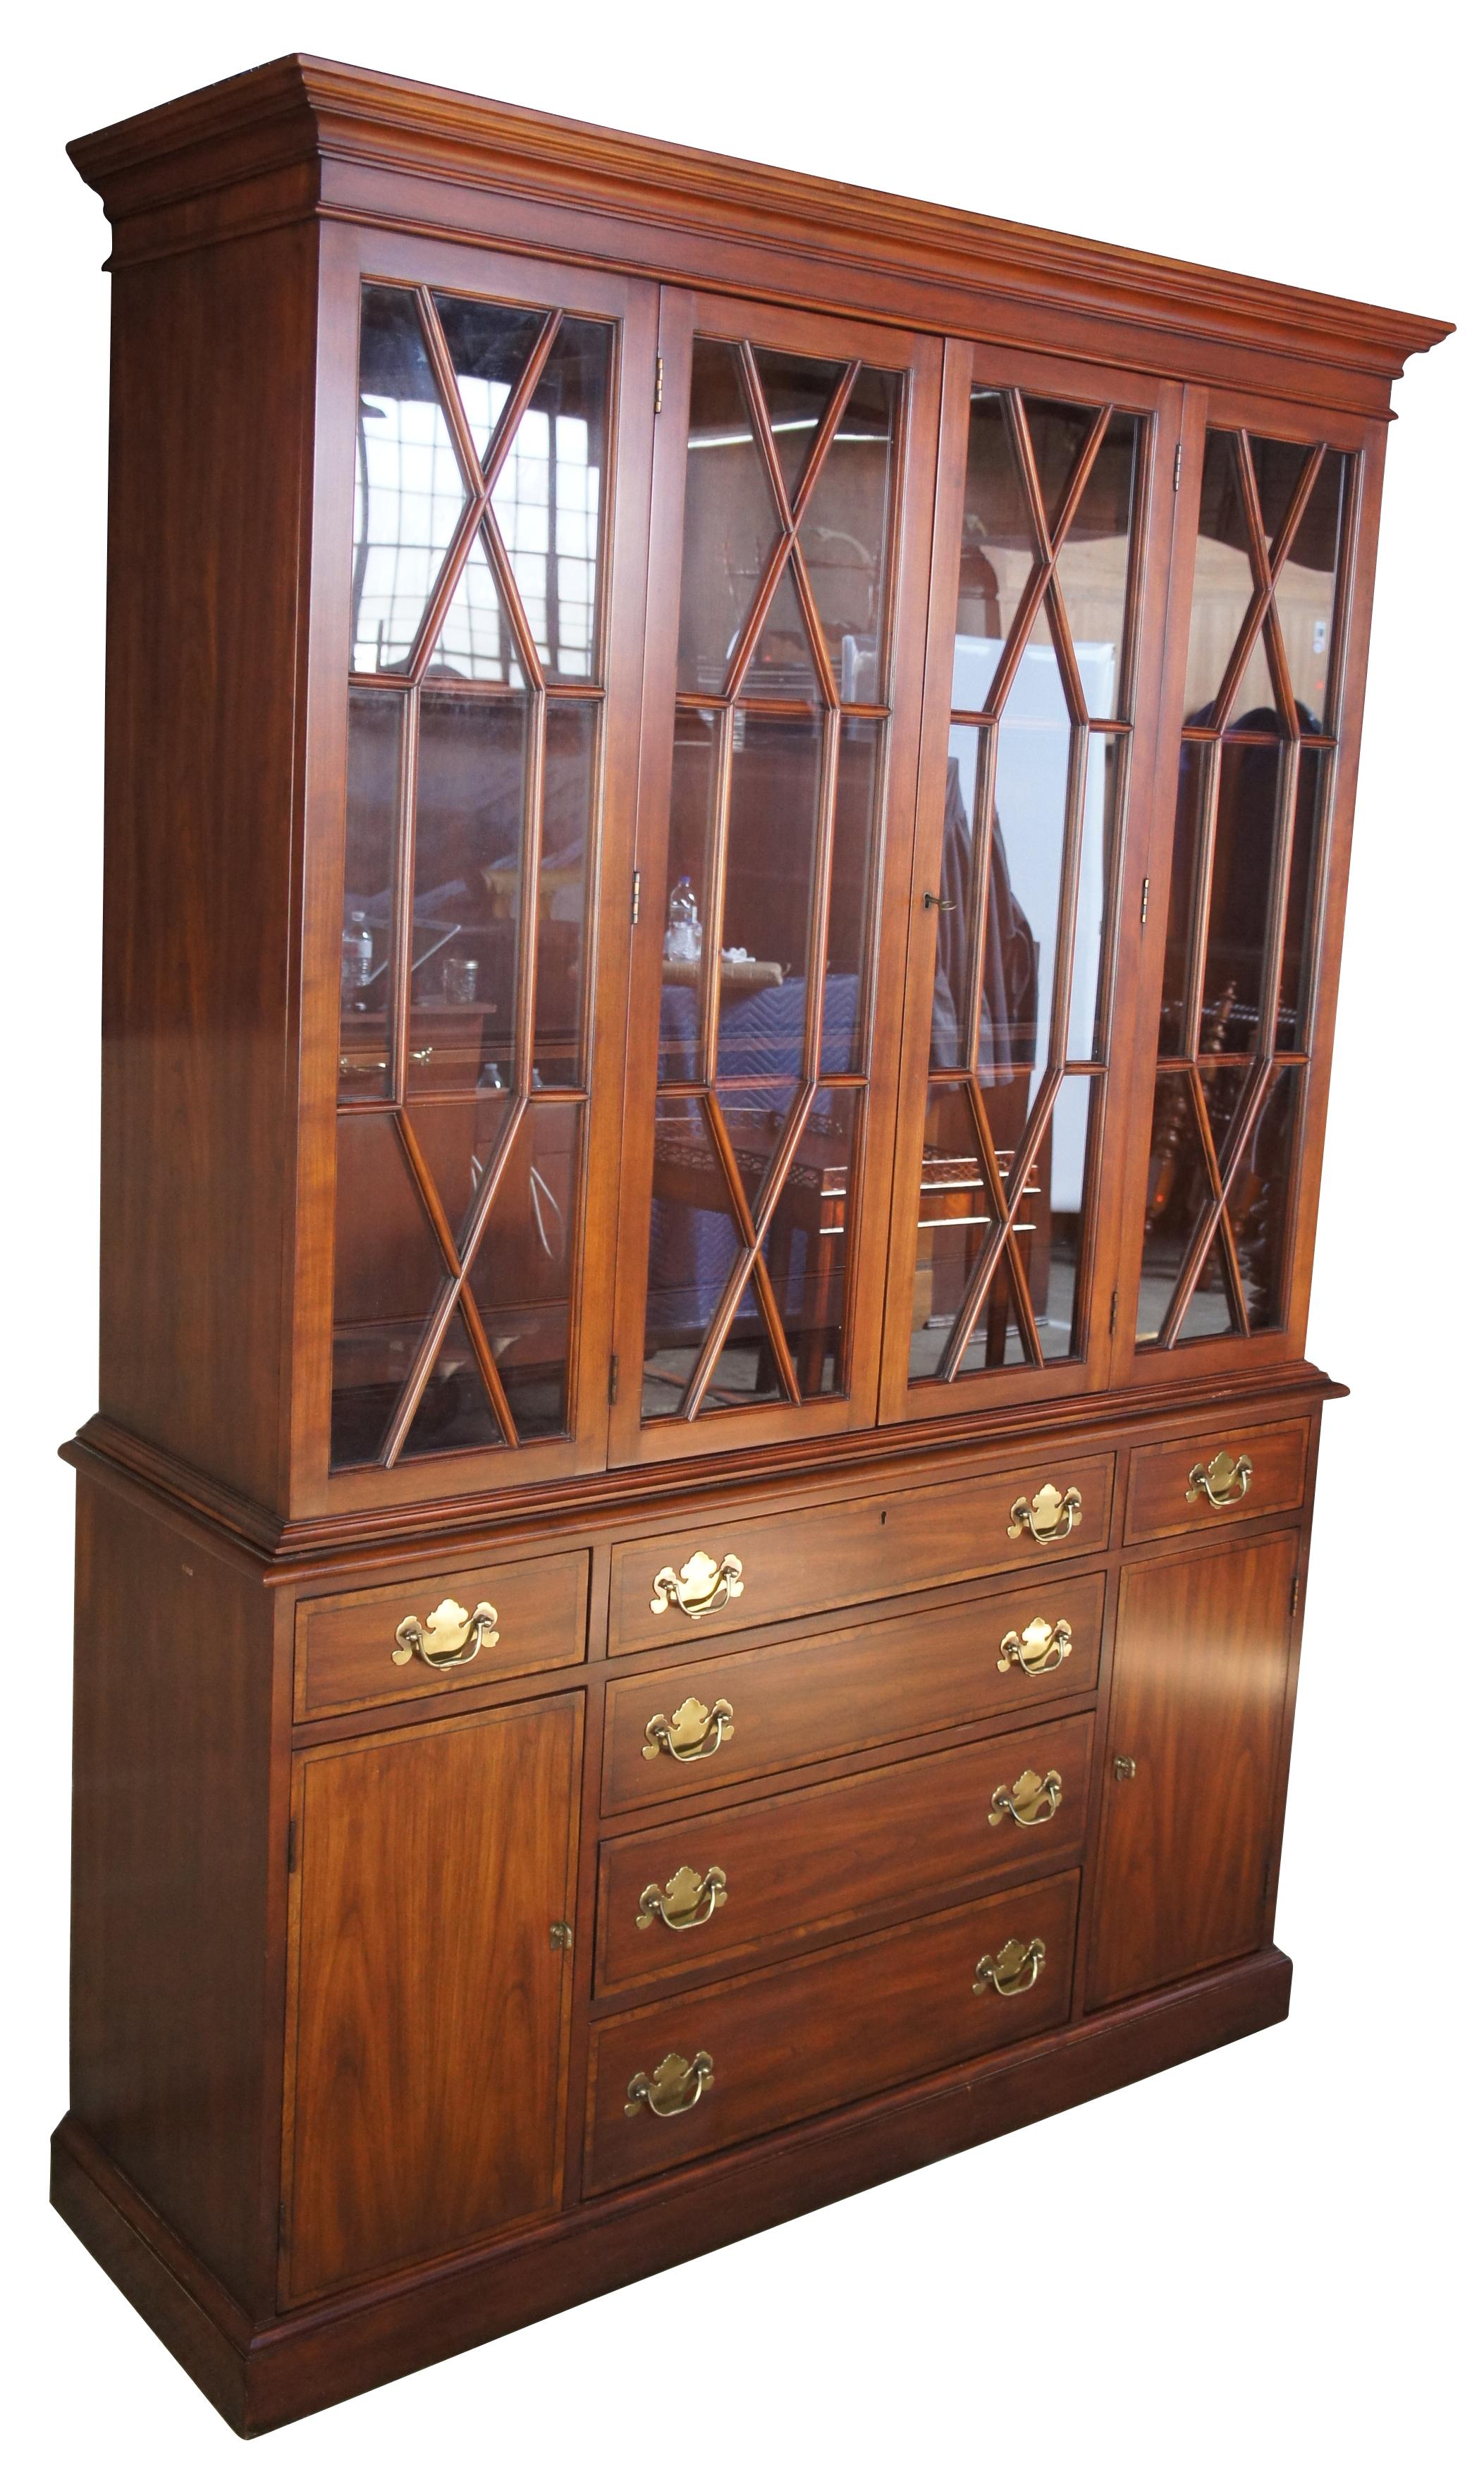 Henkel Harris wild black cherry china cabinet with lattice covered glass doors, circa 1980s. A beautiful reproduction of 18th century styling. Features six drawers (one with silverware cloth) and two lower cabinets with shelves. Stunning cherrywood